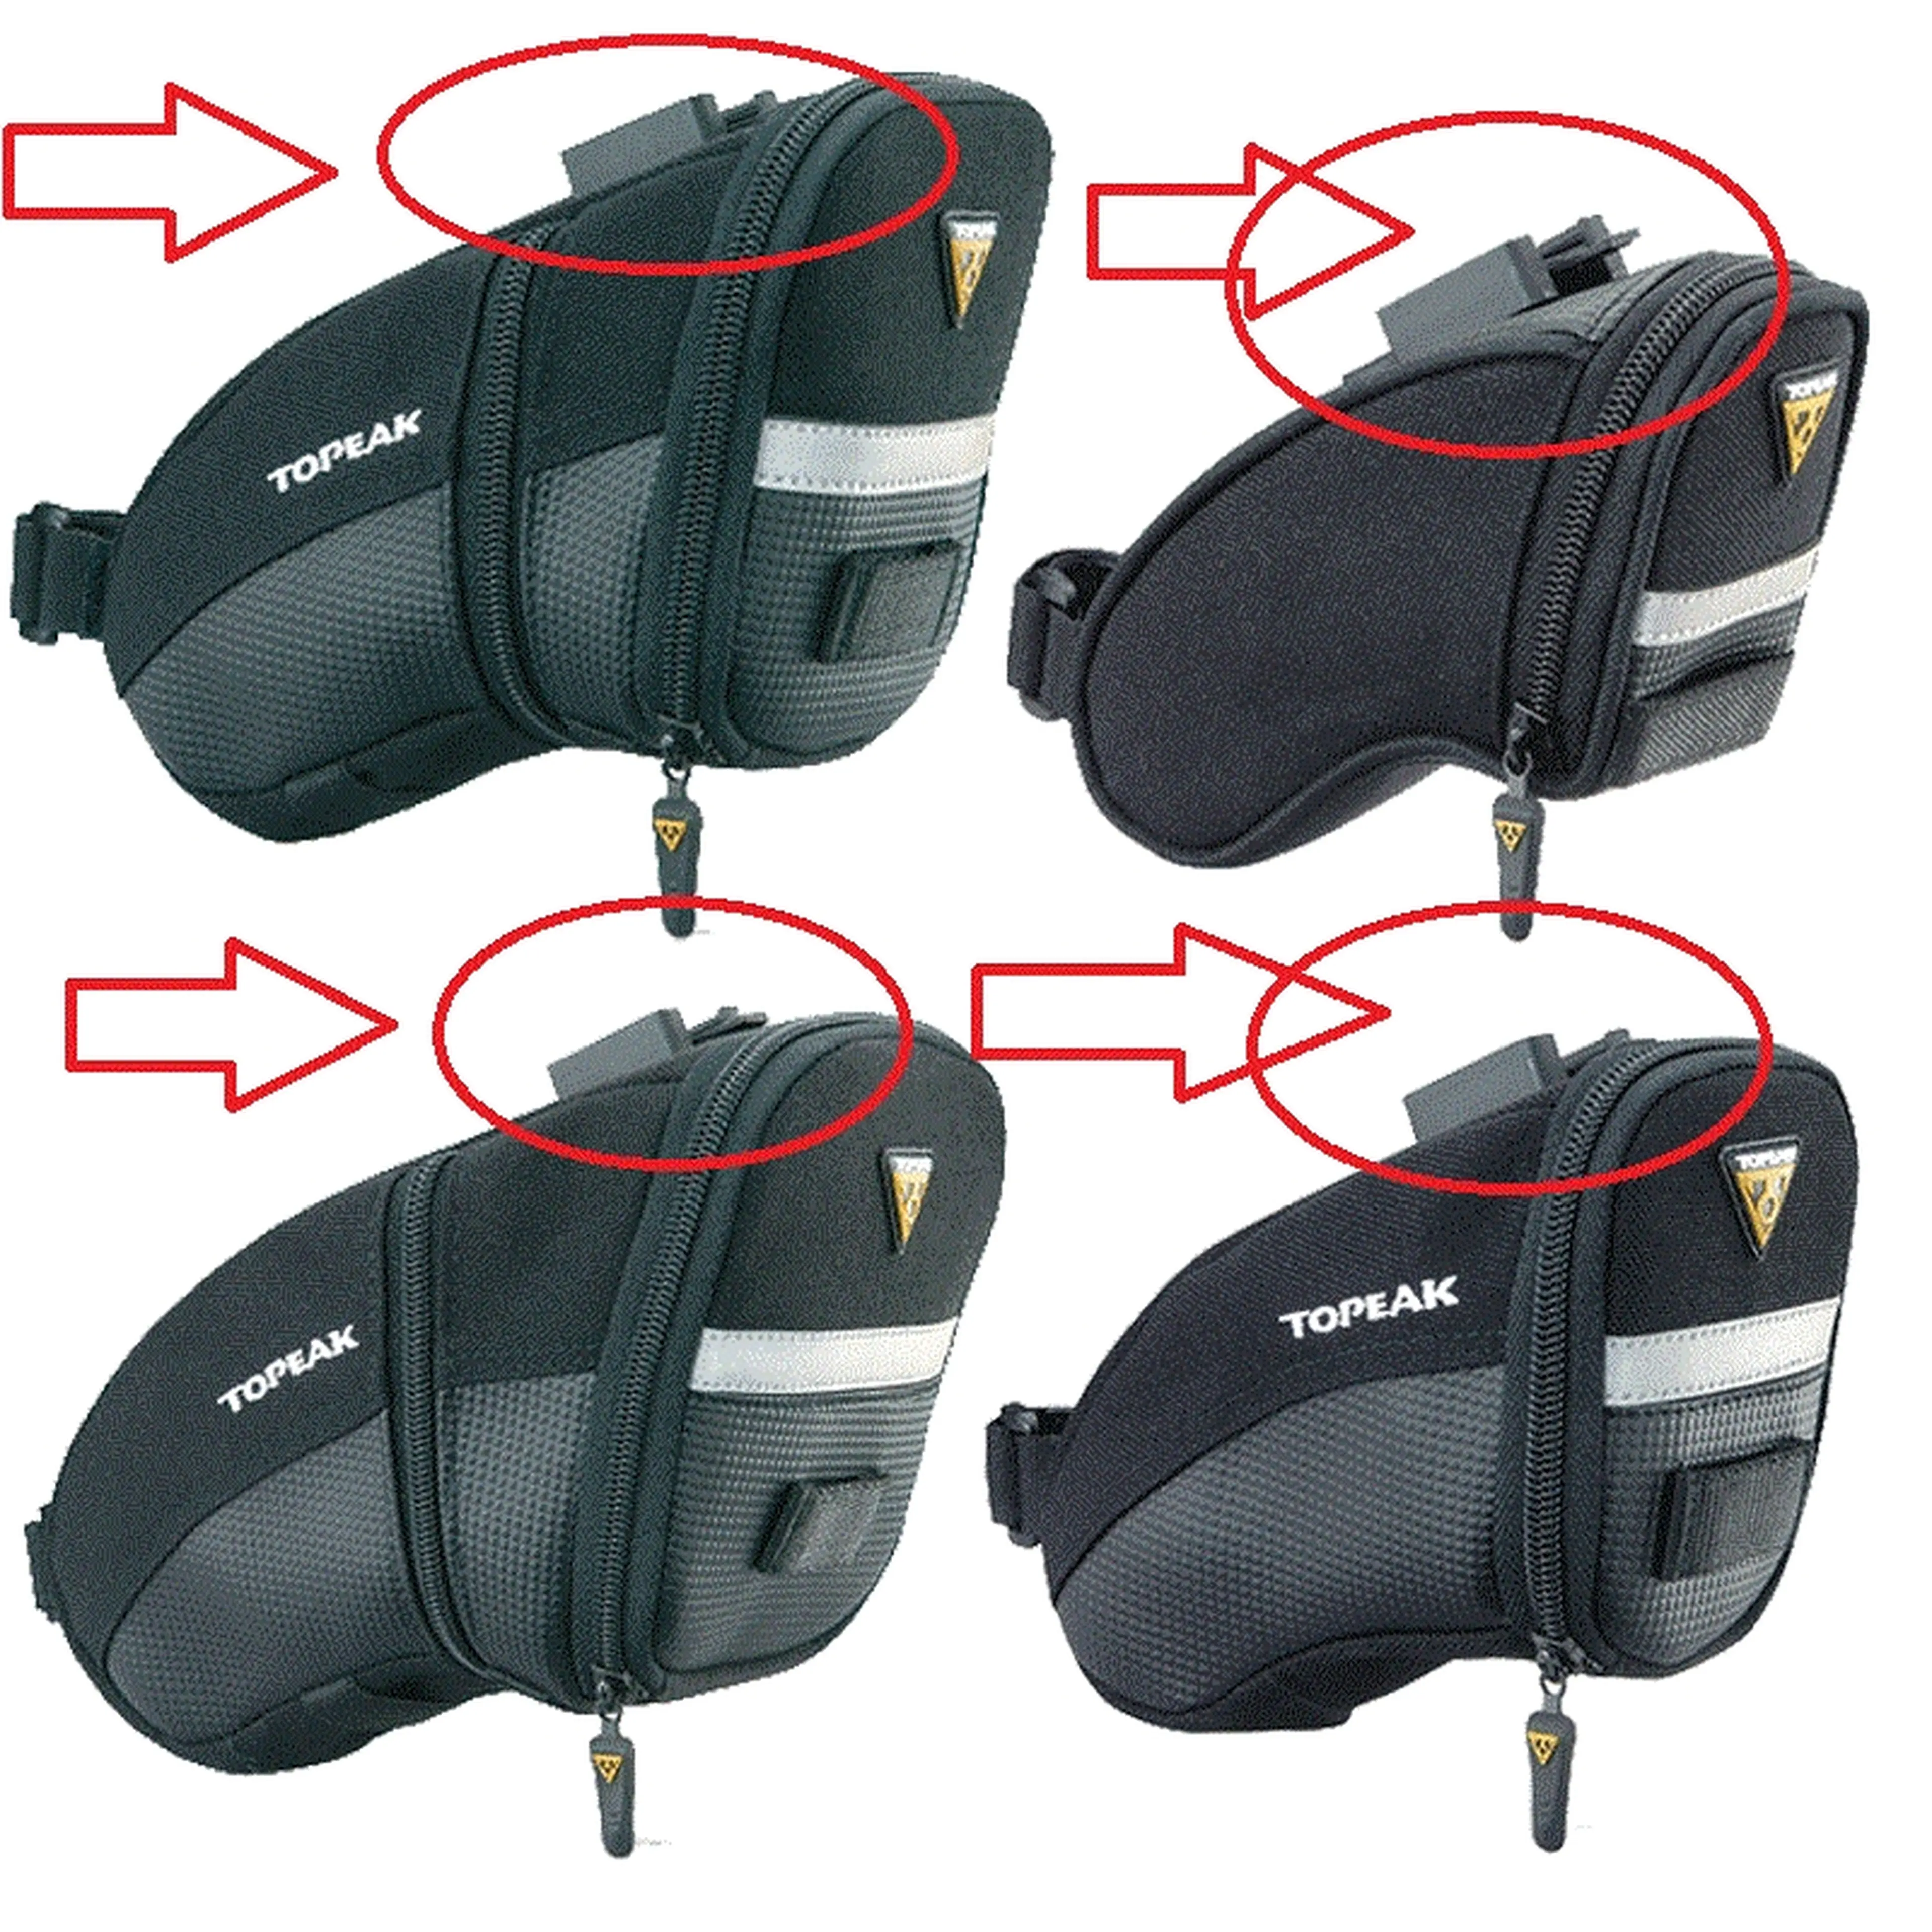 3. Topeak, CUBE  Saddle Adapter for CLICK Saddle Bags